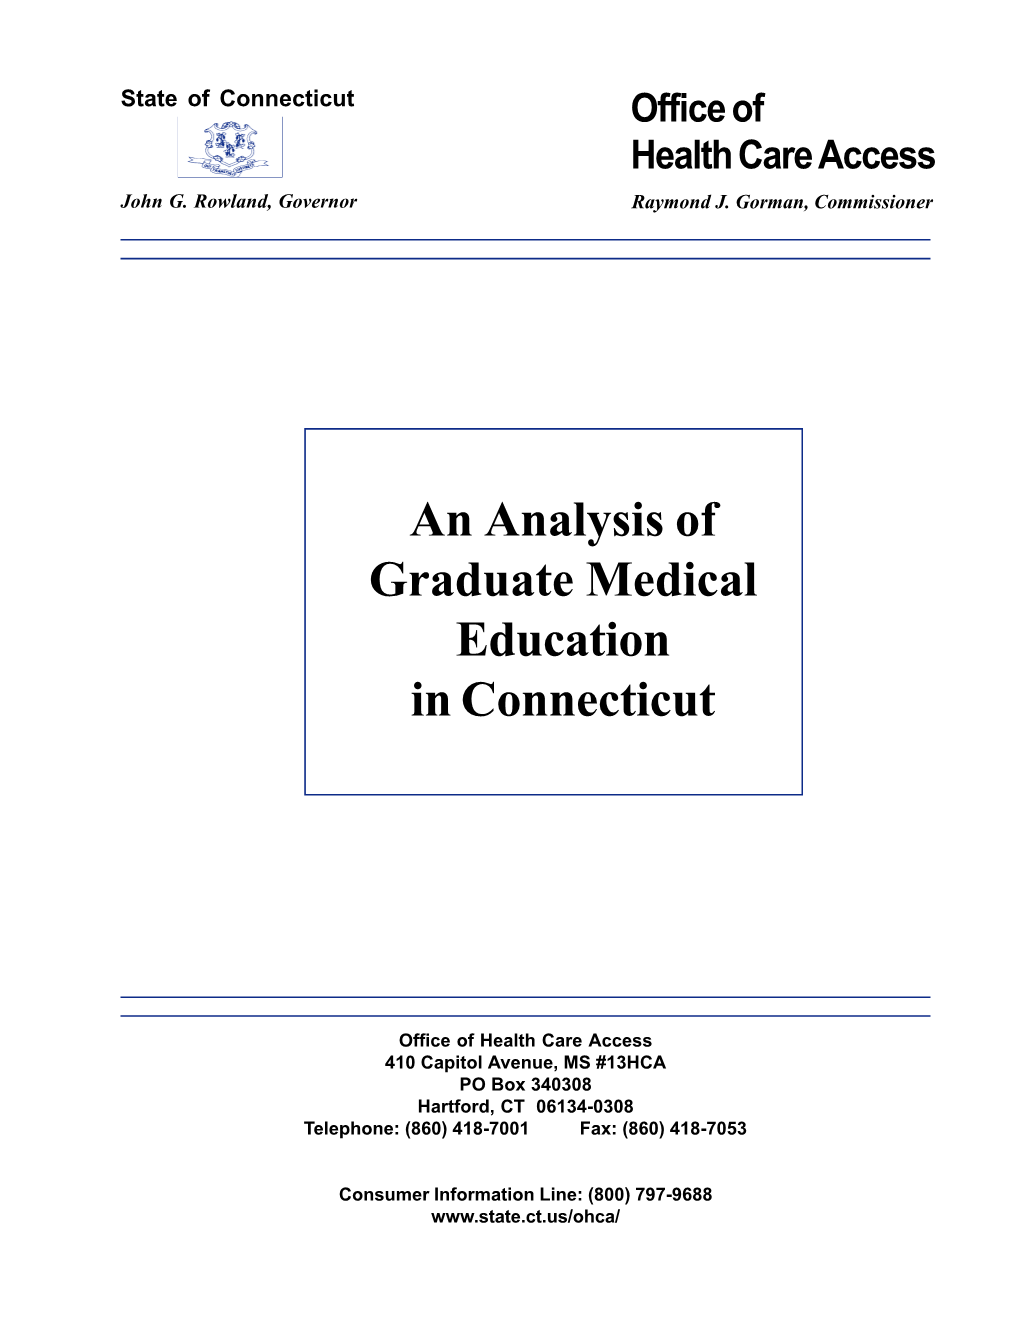 An Analysis of Graduate Medical Education in Connecticut